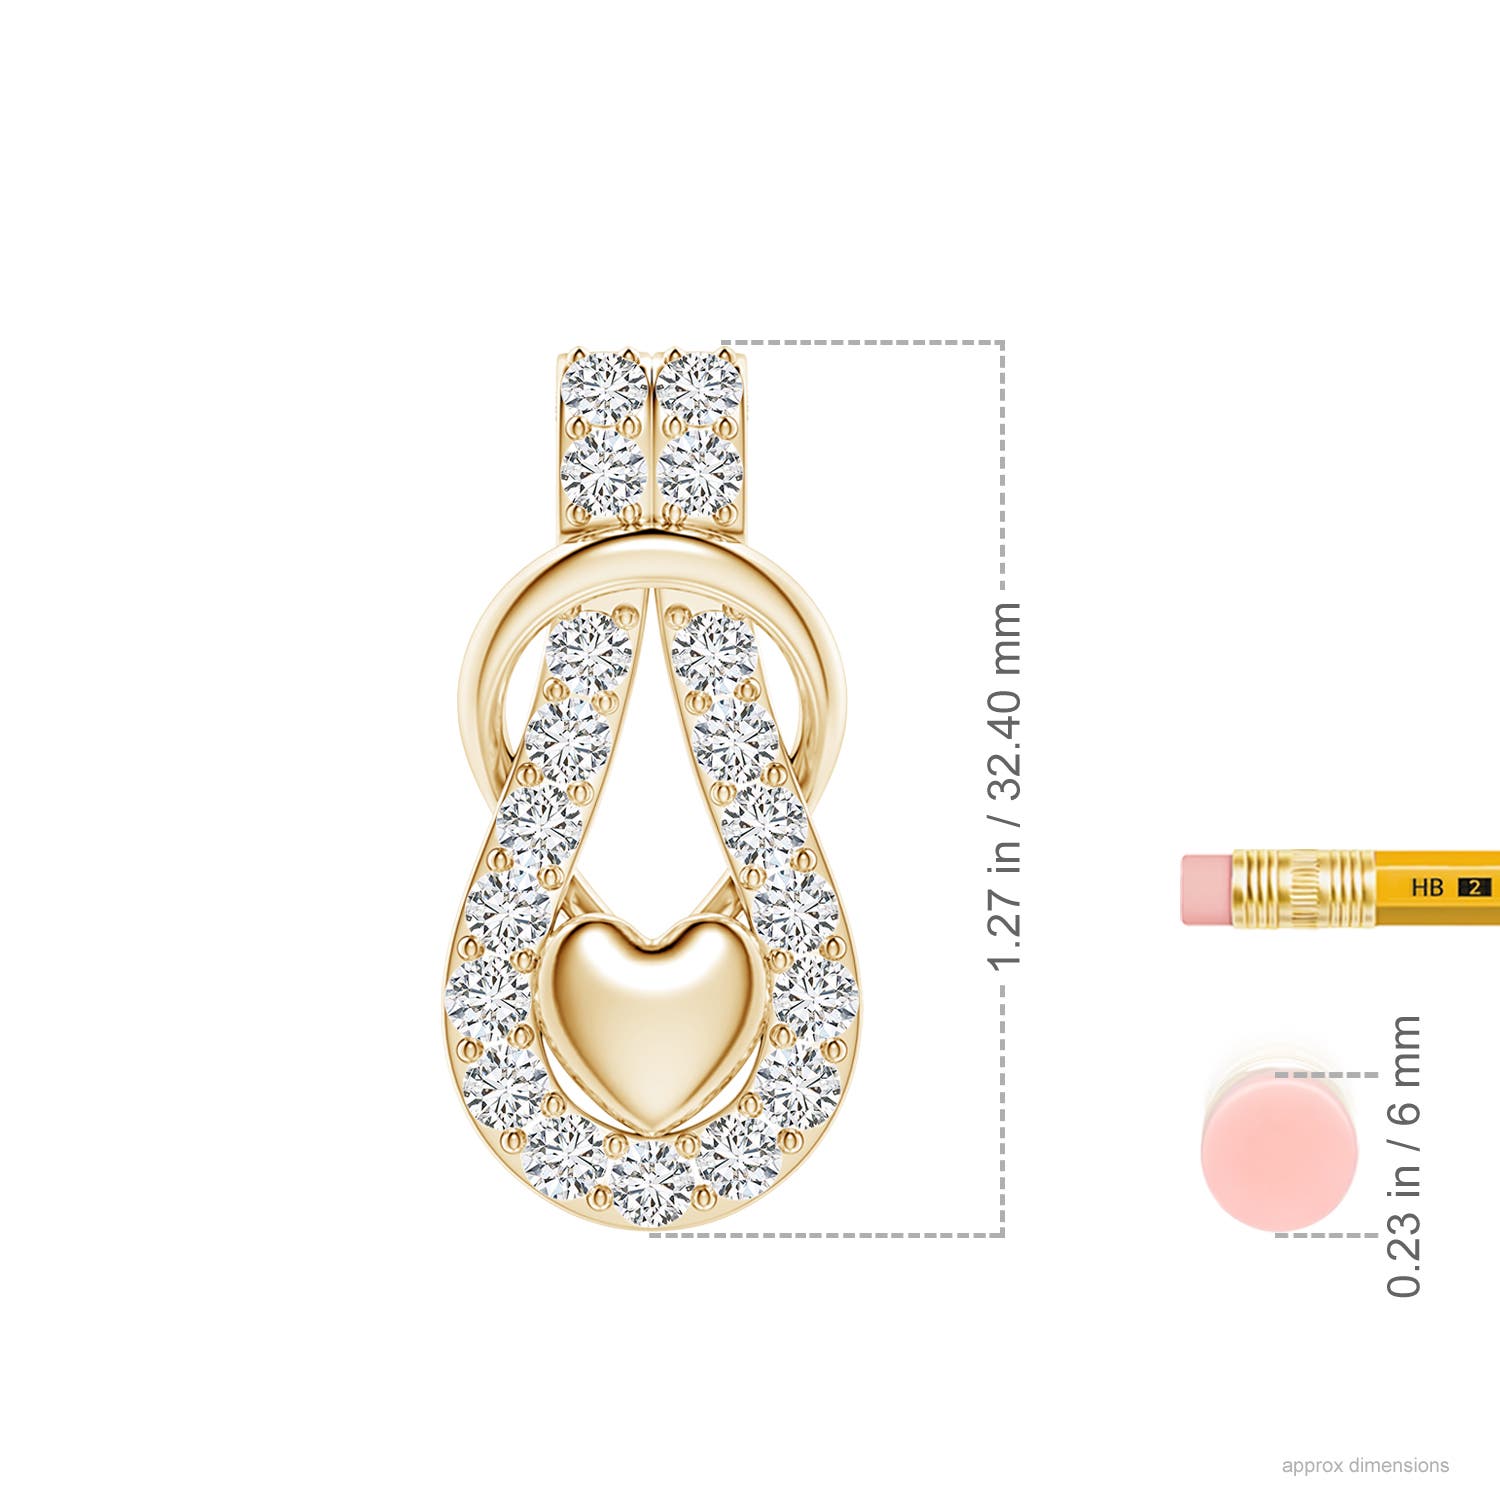 H, SI2 / 1.99 CT / 18 KT Yellow Gold